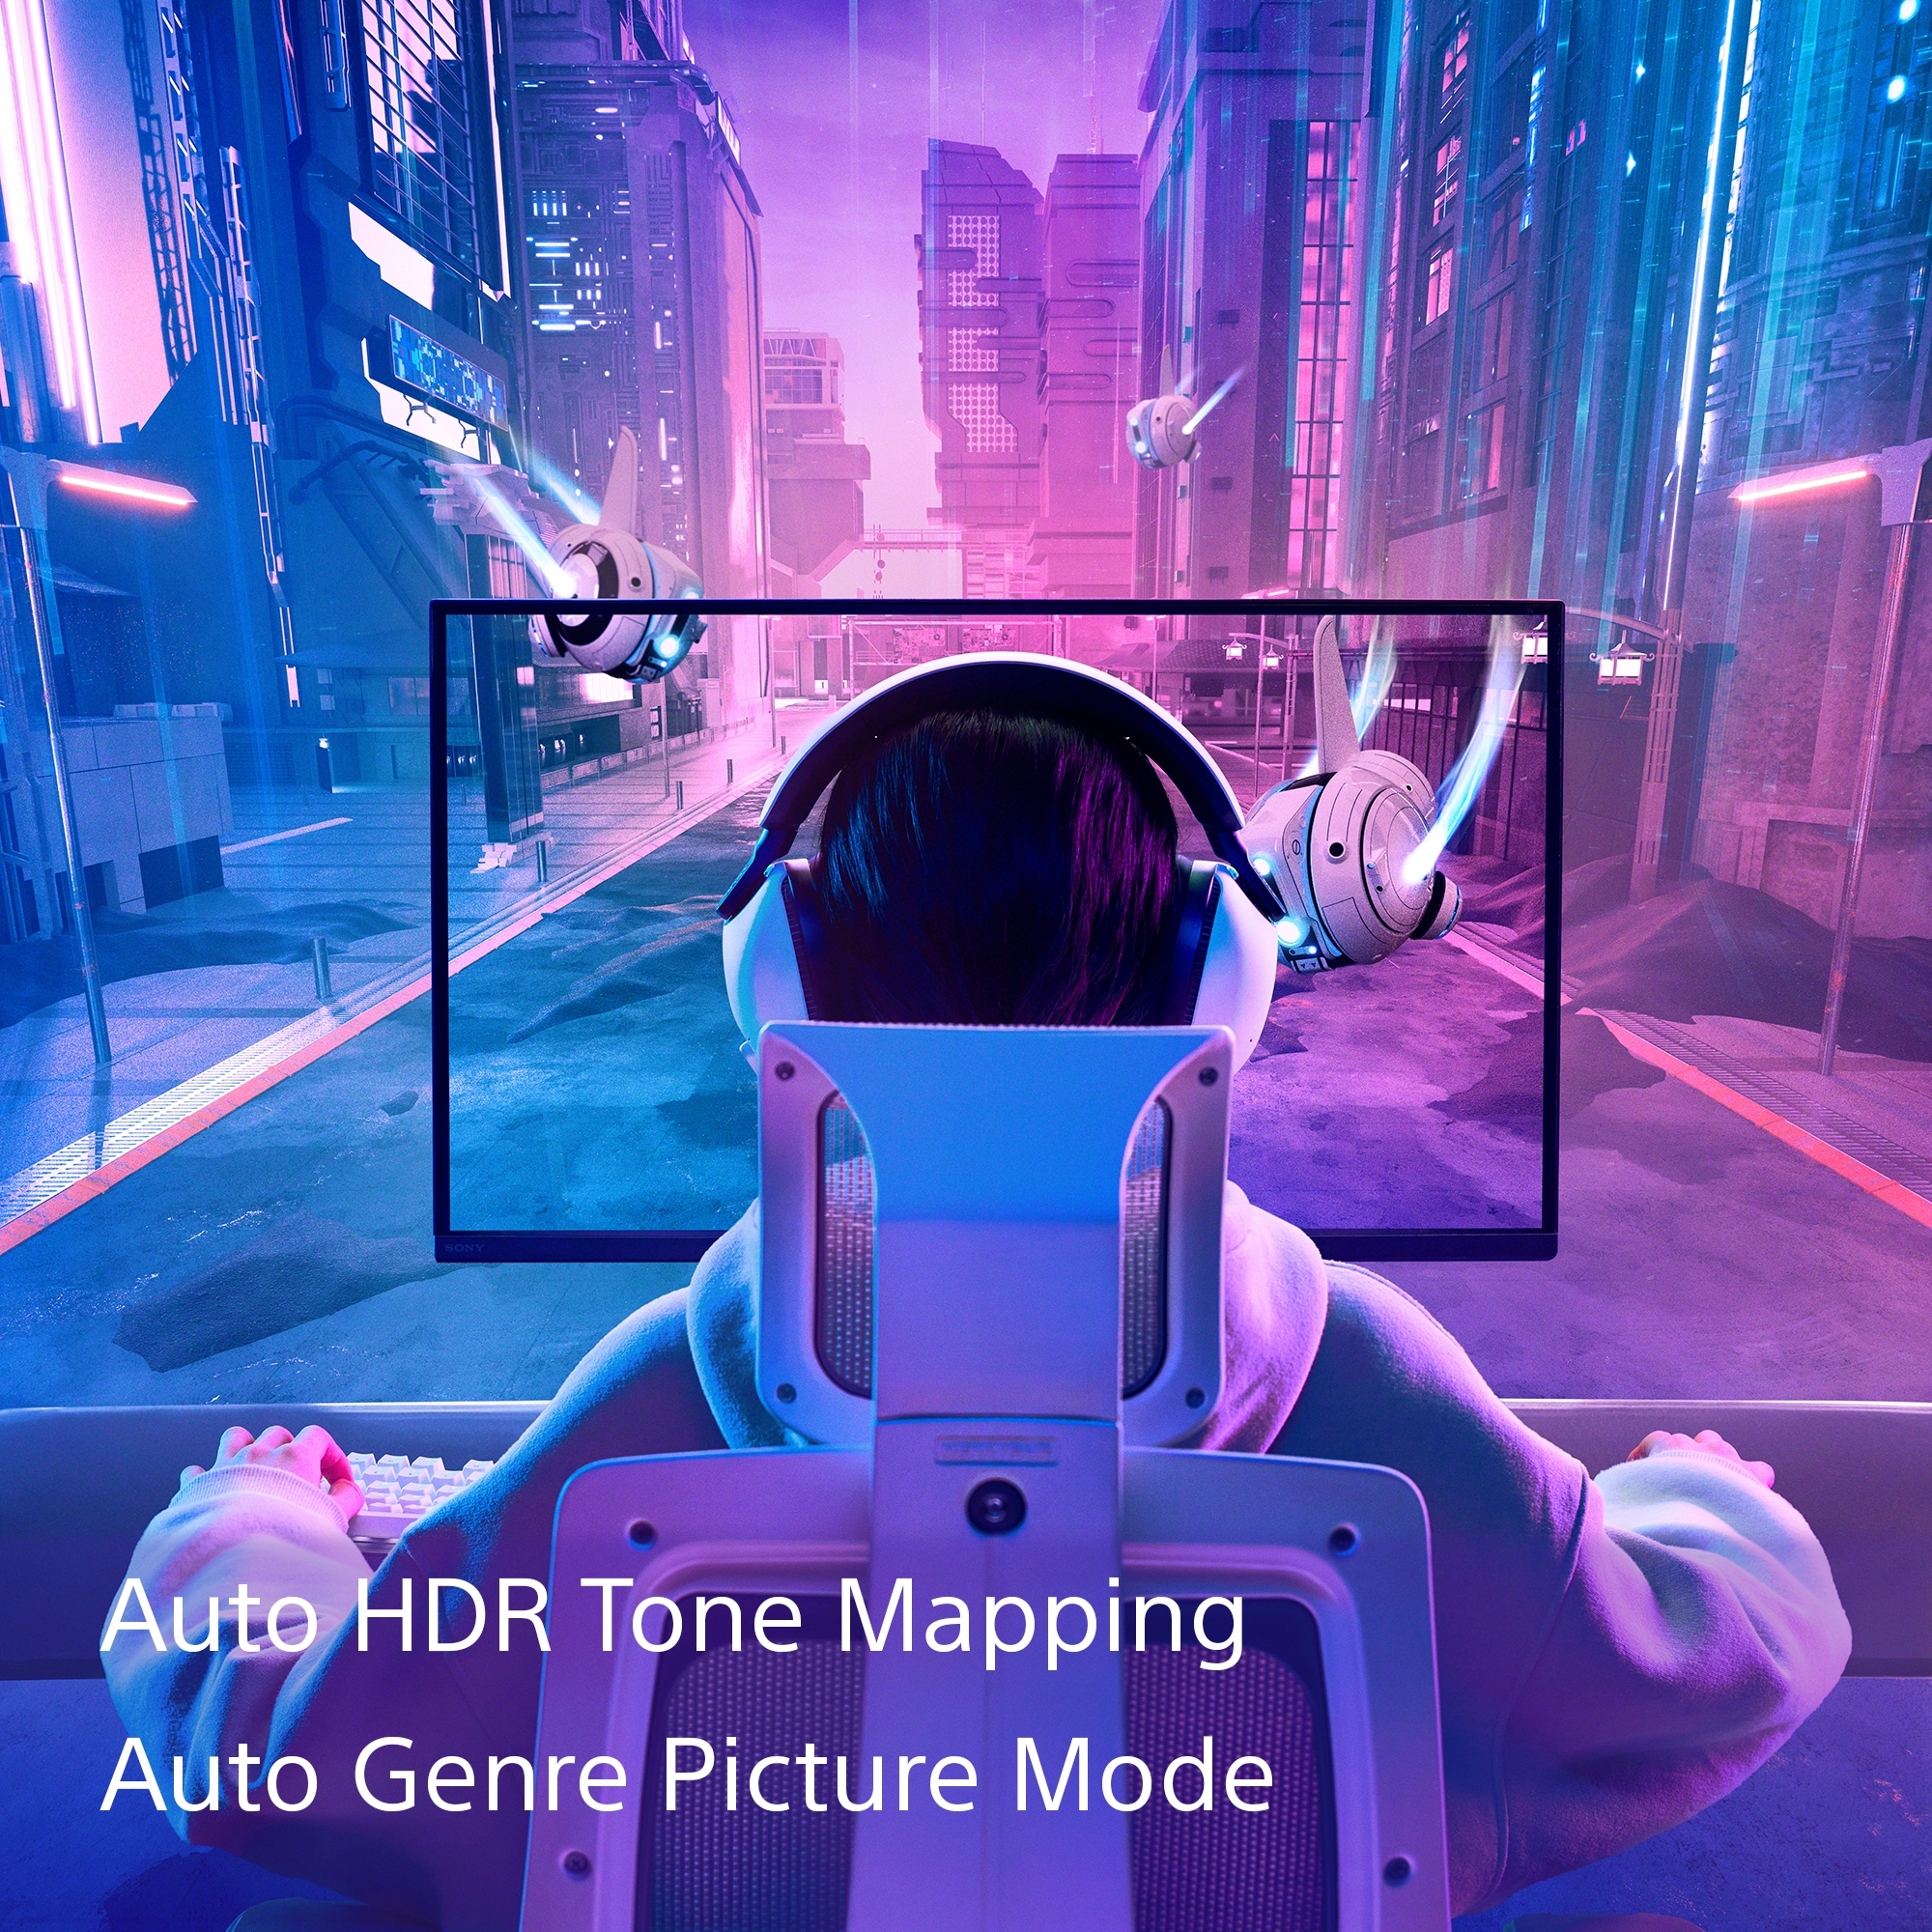 Sony Inzone gaming headset og Auto HDR Tone Mapping Auto Genre Picture Mode